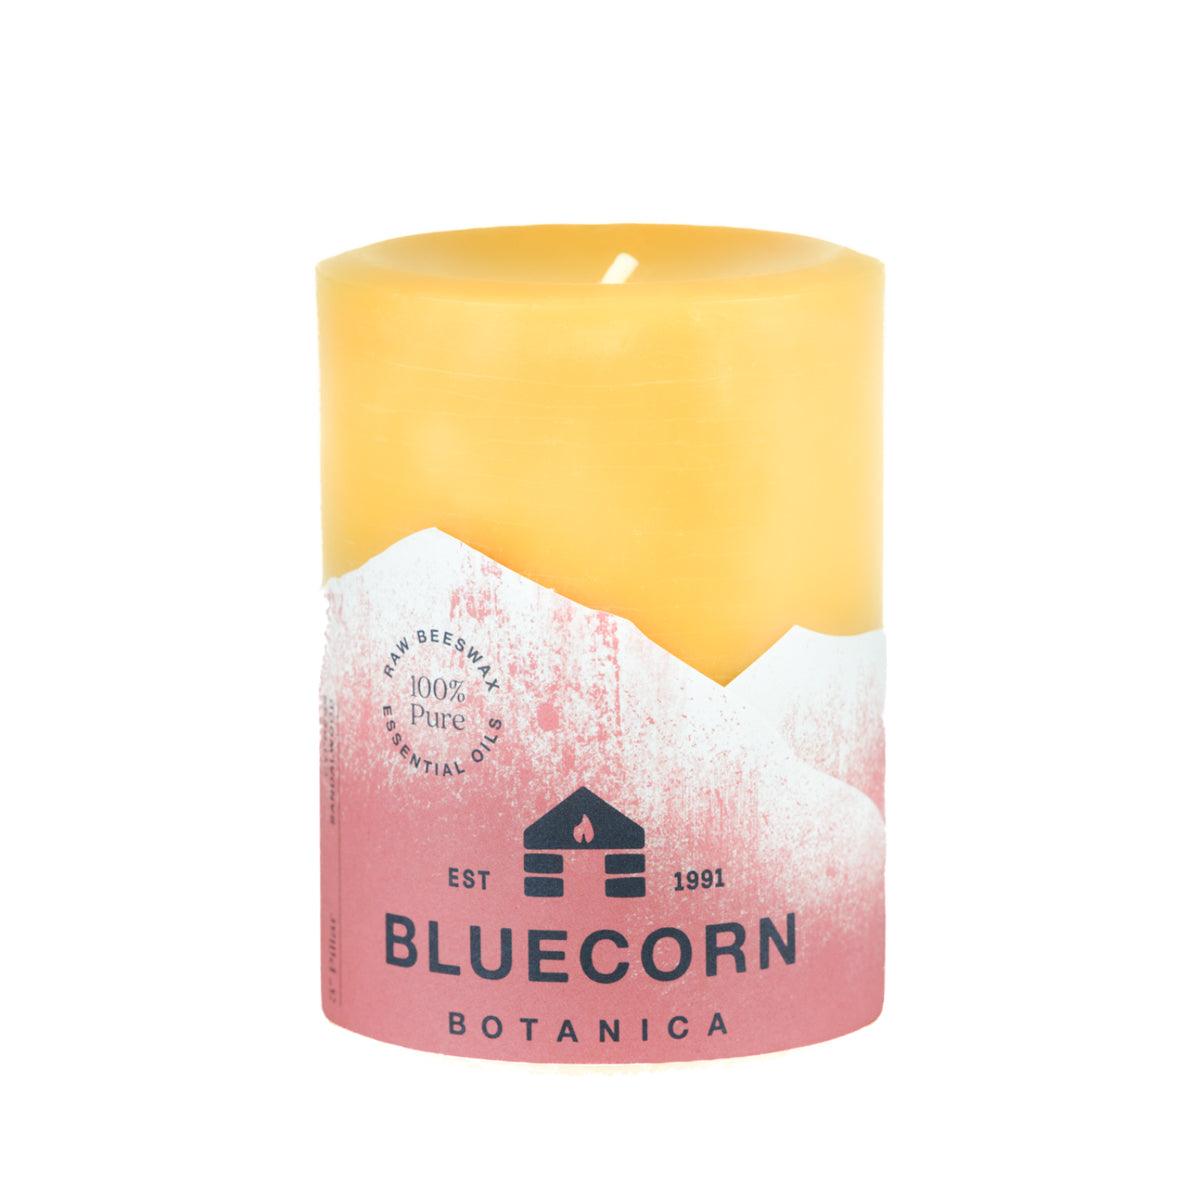 Bluecorn Botanica 100% Pure Beeswax Cypress and Sandalwood 3" x 4" Scented Pillar Candle. Burn Time: 60 hours. Made with 100% Pure Beeswax, 100% Pure Essential Oils, and a 100% pure cotton wick, no lead. Candles are paraffin free, clean burning and non-toxic. Features Bluecorn Botanica label in Red printed on 100% recycled paper. Wax is golden in color. 